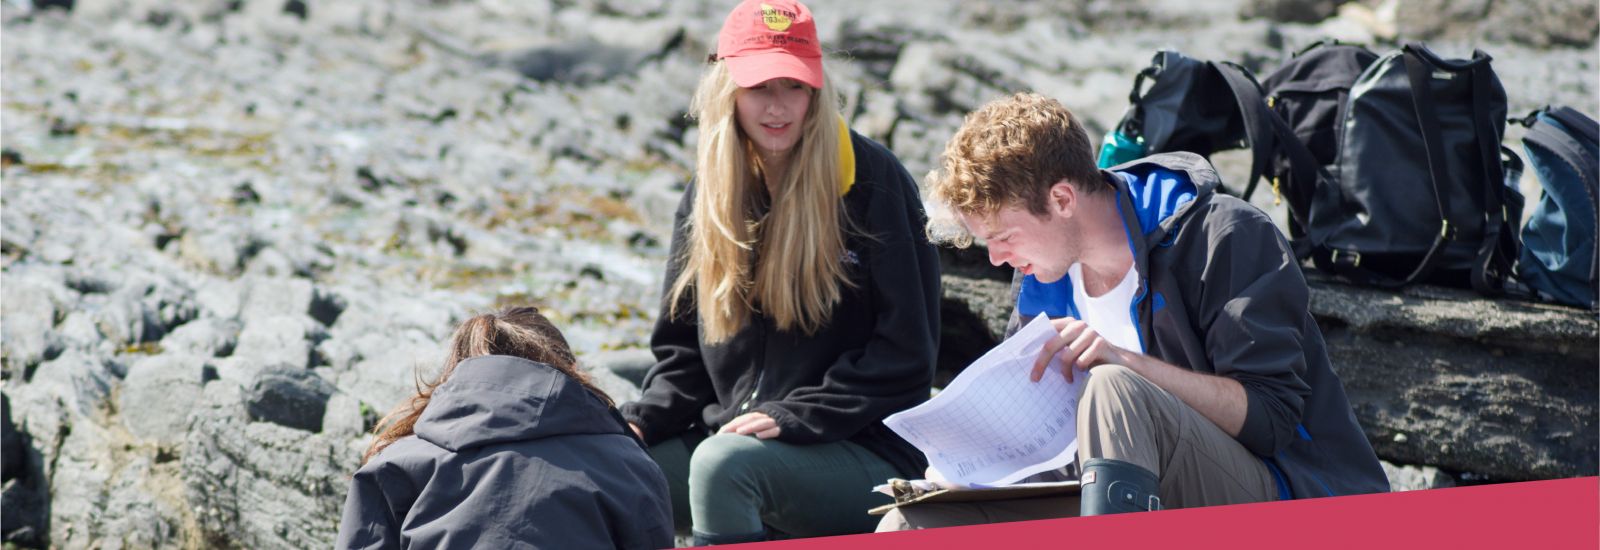 Three students in outdoor clothes record data on a clipboard in a rocky area of Orielton, Wales